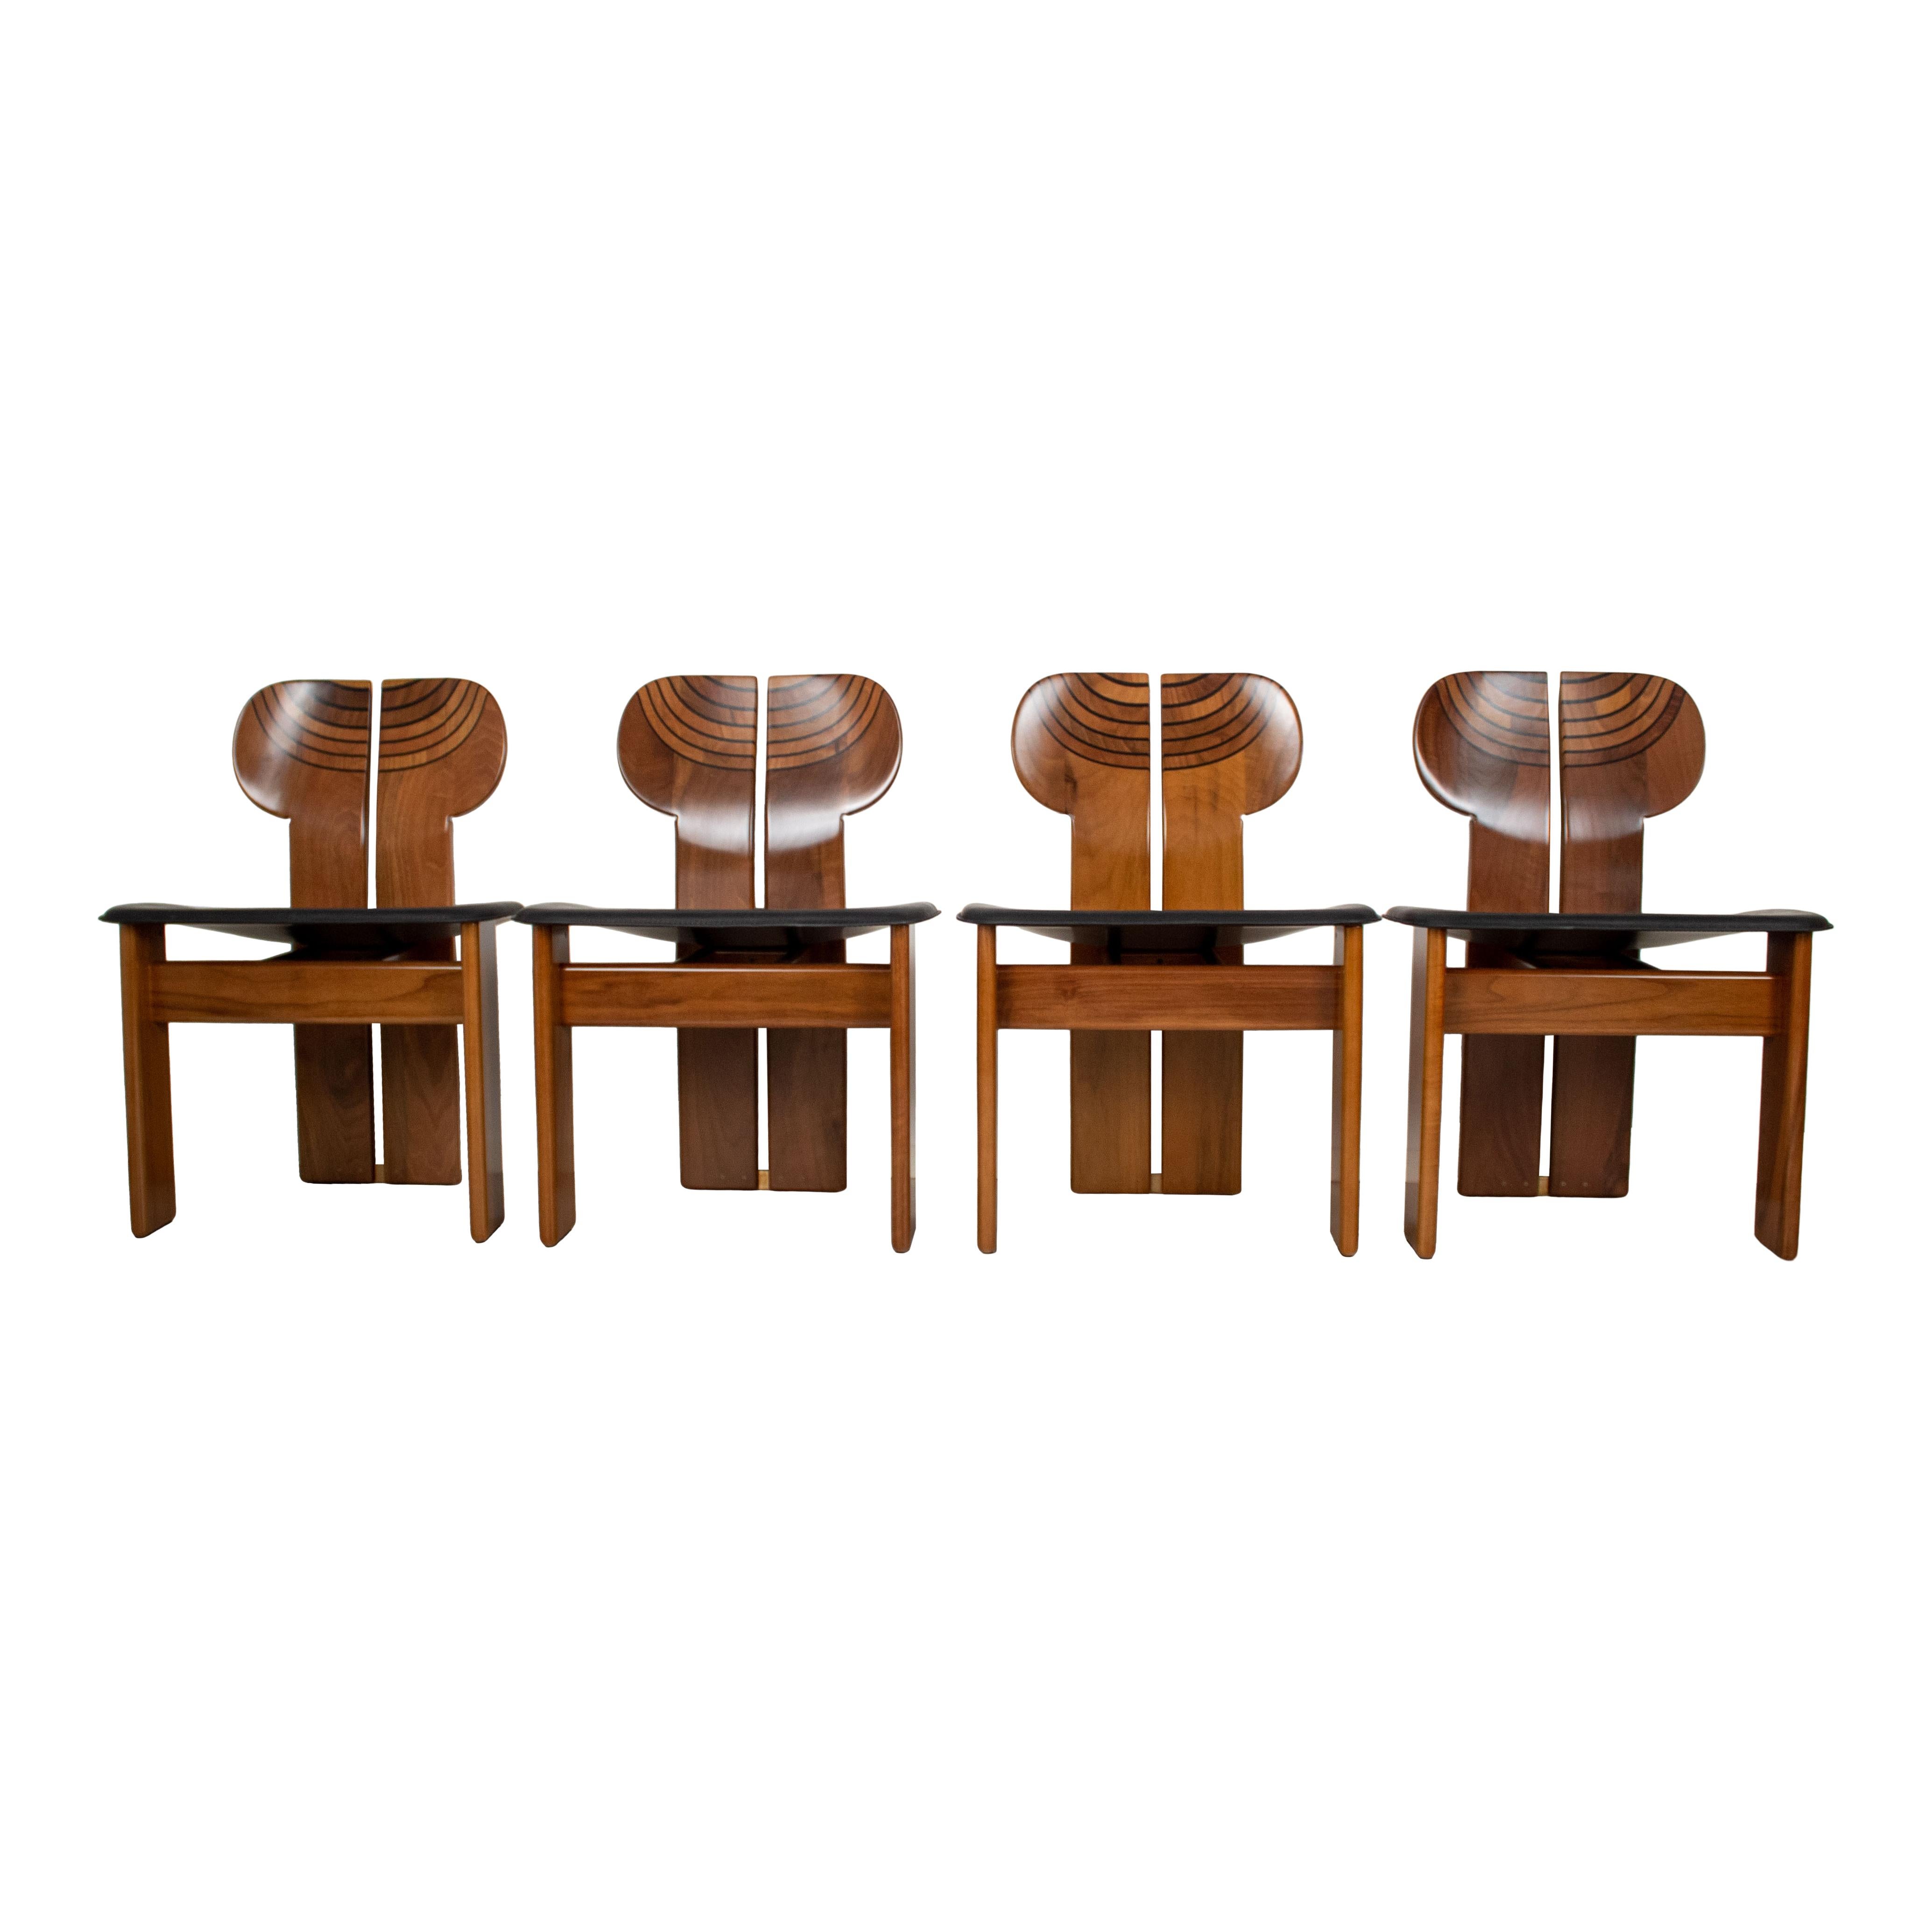 Set of four Africa dining chairs, designed by Afra and Tobia Scarpa and produced by the Italian manufacturer Maxalto in 1976.
They feature a clear walnut briar structure and a black leather seat.
Fully restored in Italy.

The main protagonist of the